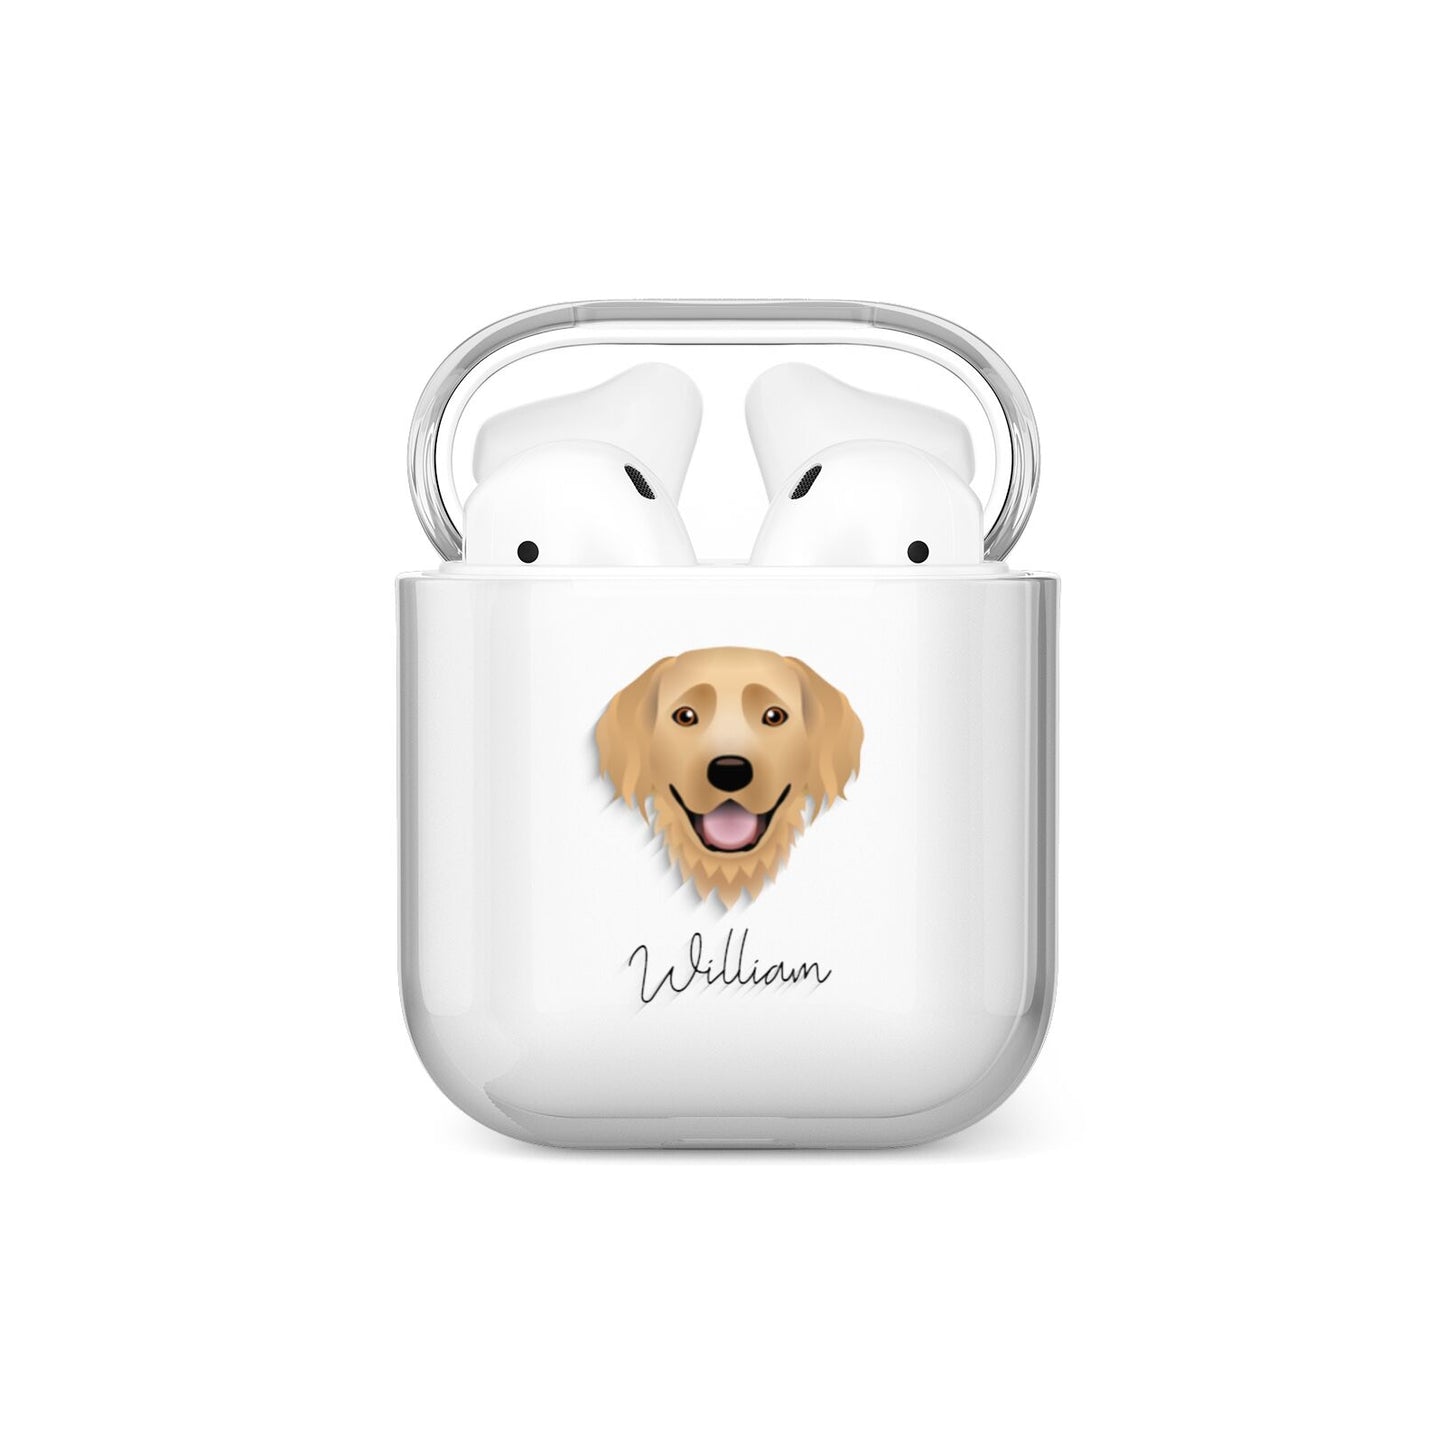 Hovawart Personalised AirPods Case